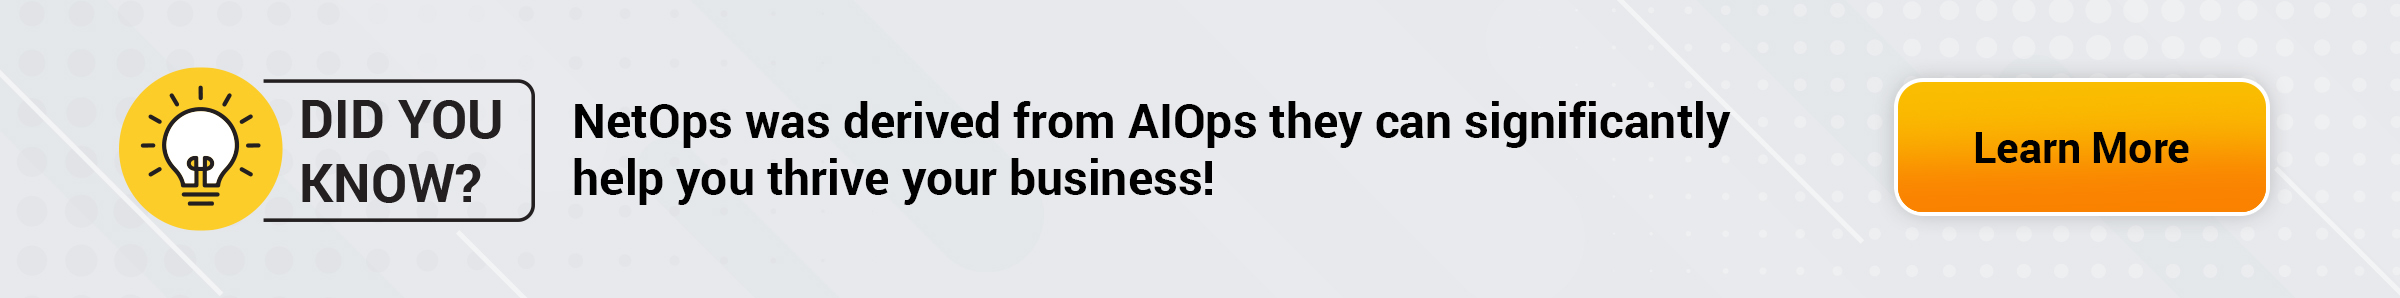 Netops and aiops for business growth